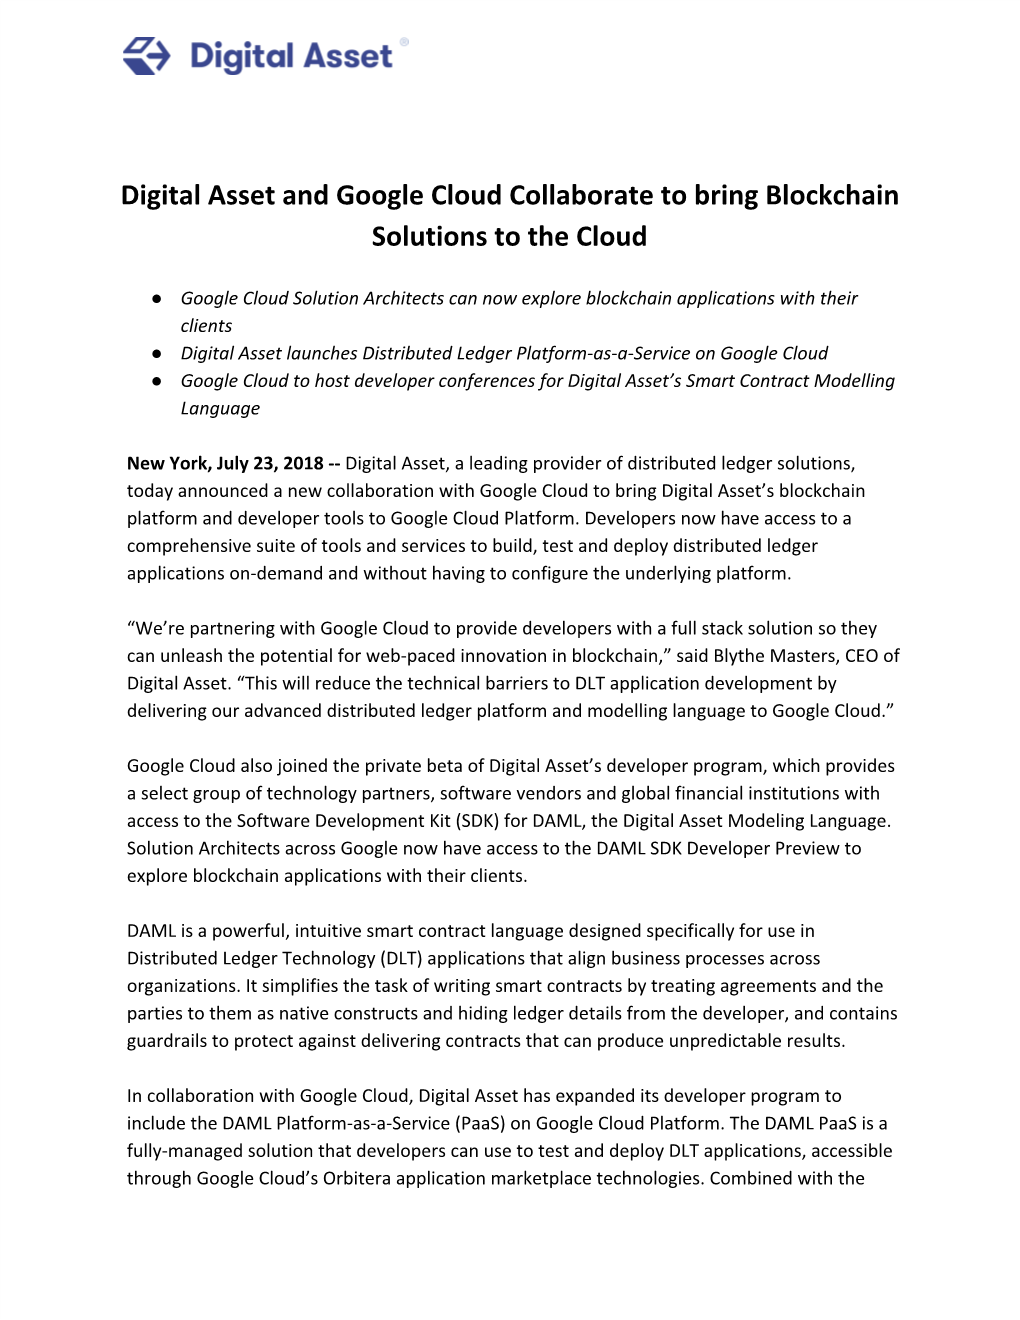 Digital Asset and Google Cloud Collaborate to Bring Blockchain Solutions to the Cloud